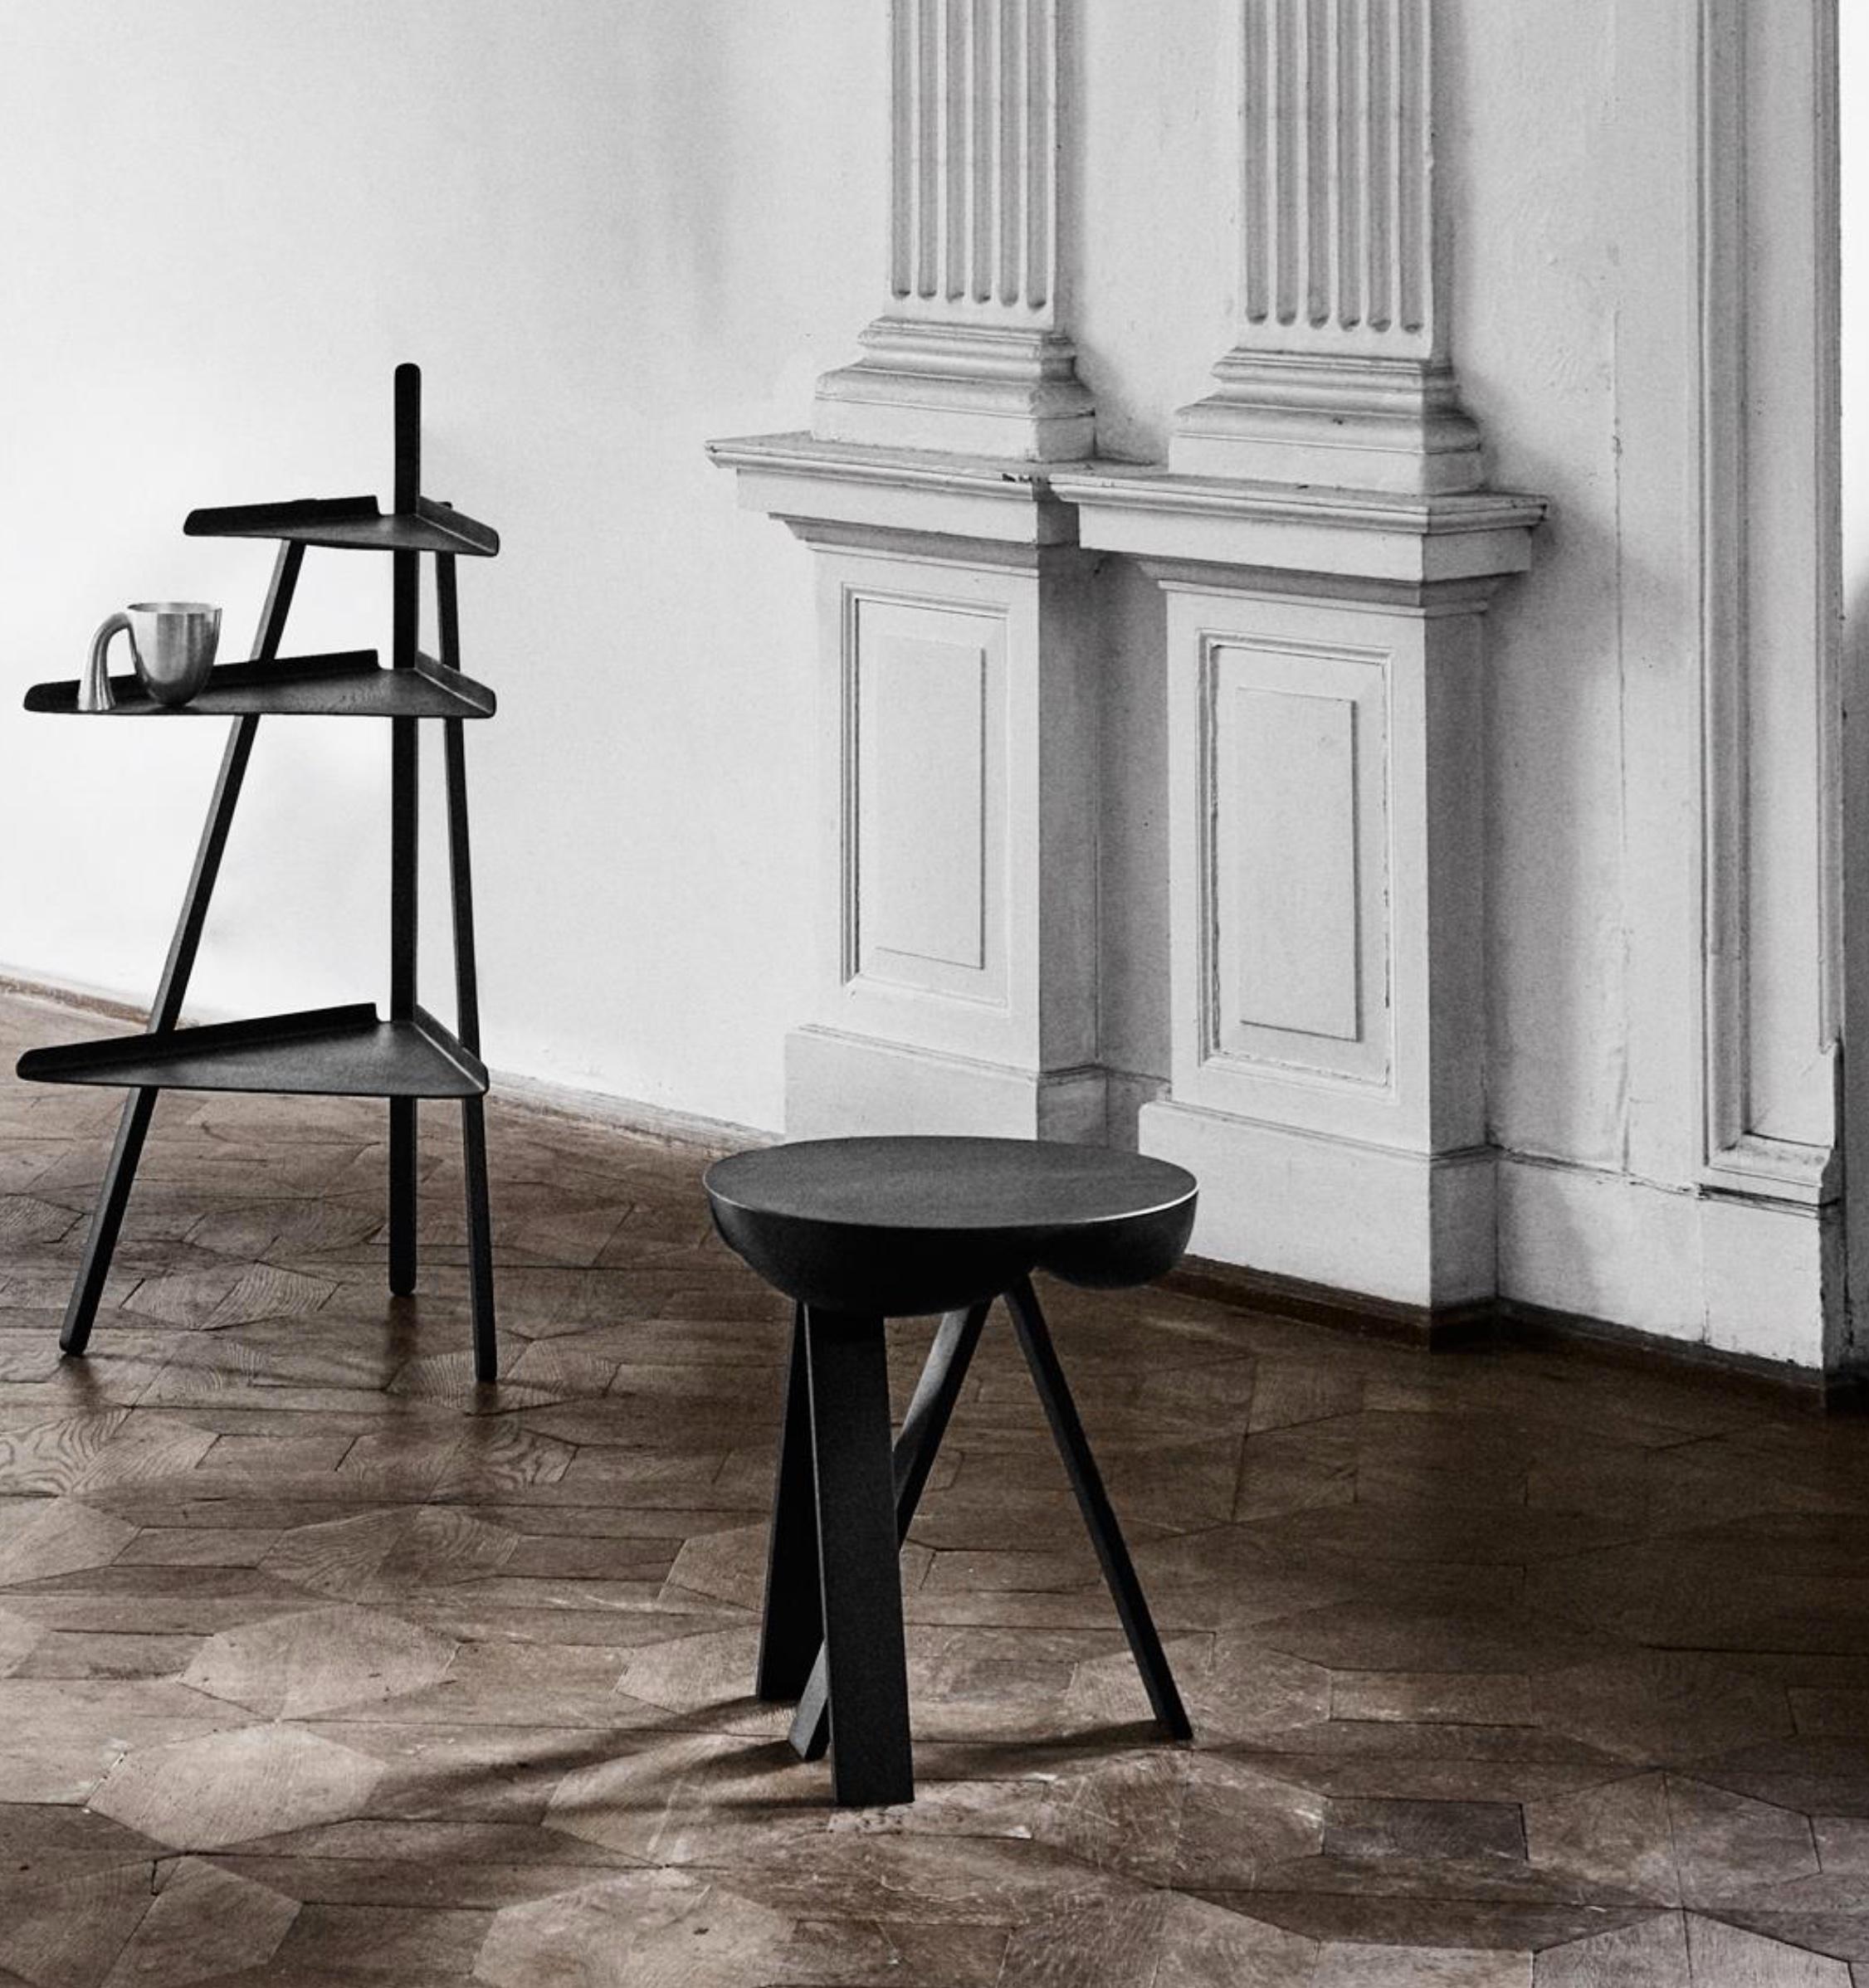 Striking. Wooden side table consisting of two stripped-down trestles and a table top. The seemingly heavy top contrasts the rigid trestles. The top gives in and provides space for the sharp ends of the trestles to lock the legs and the top together.